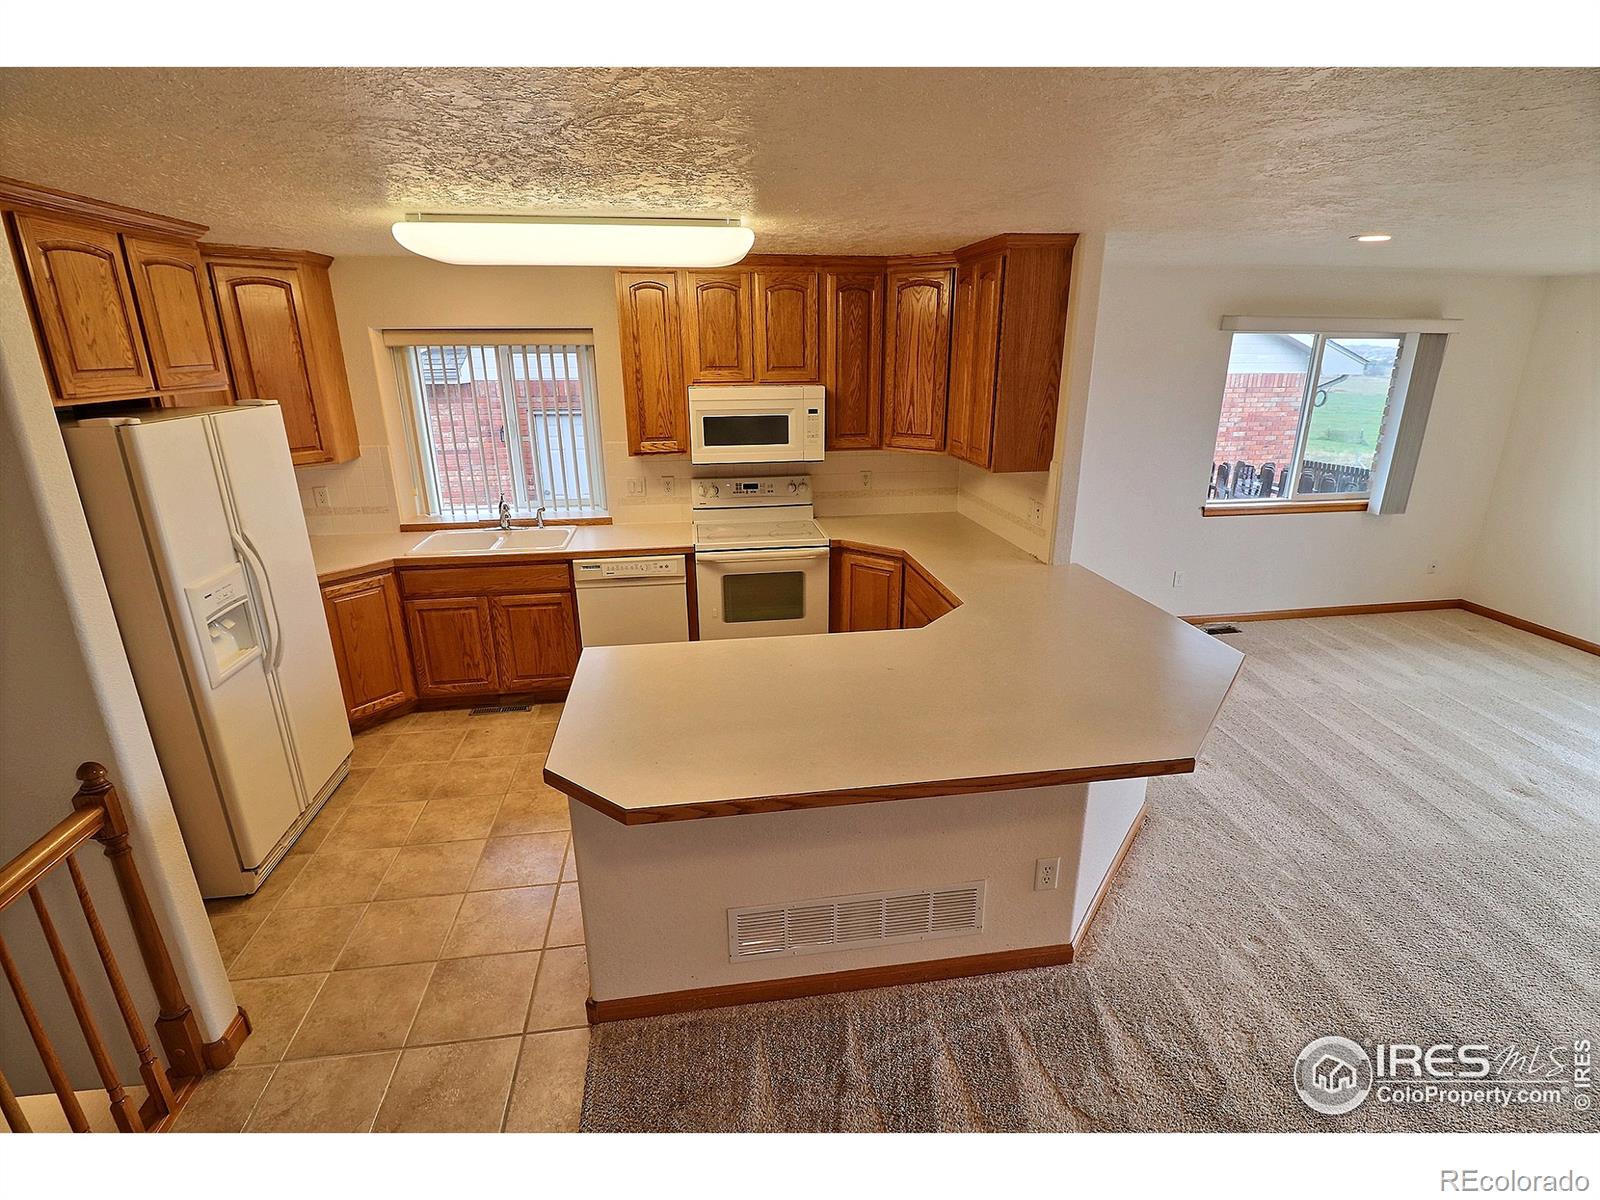 7229 18th, Greeley, CO